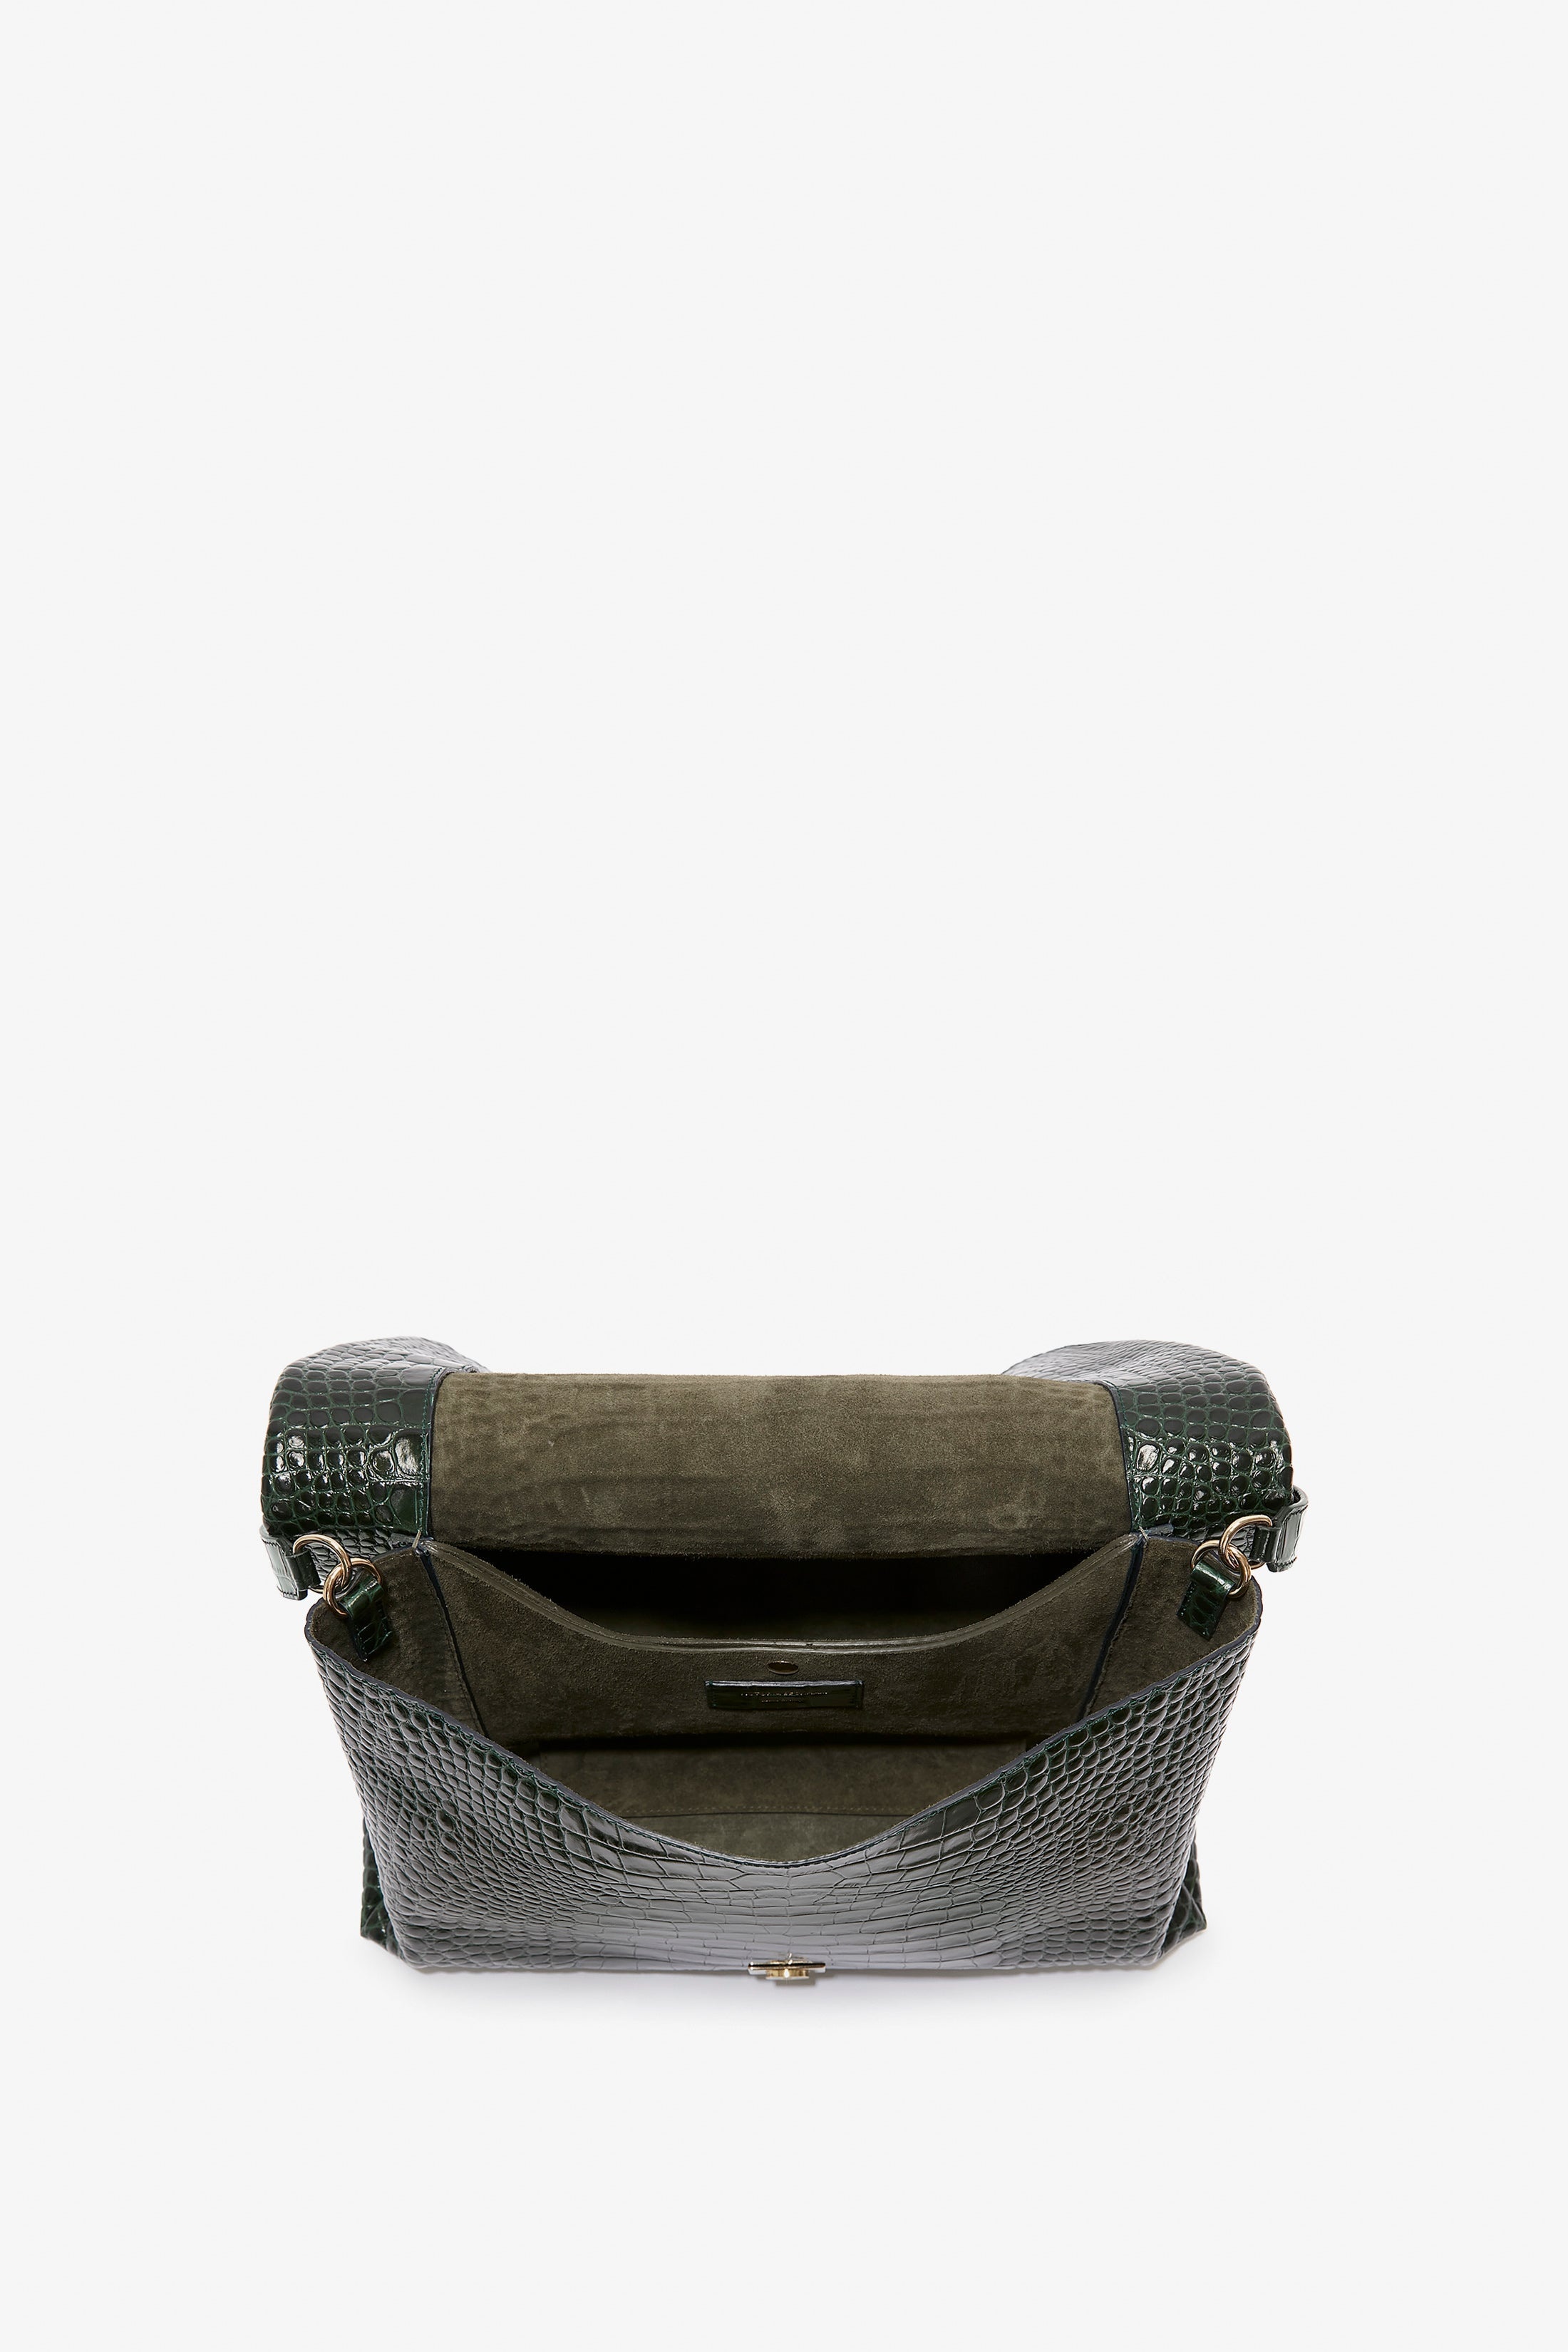 Jumbo Chain Pouch in Dark Forest Croc Leather - 7